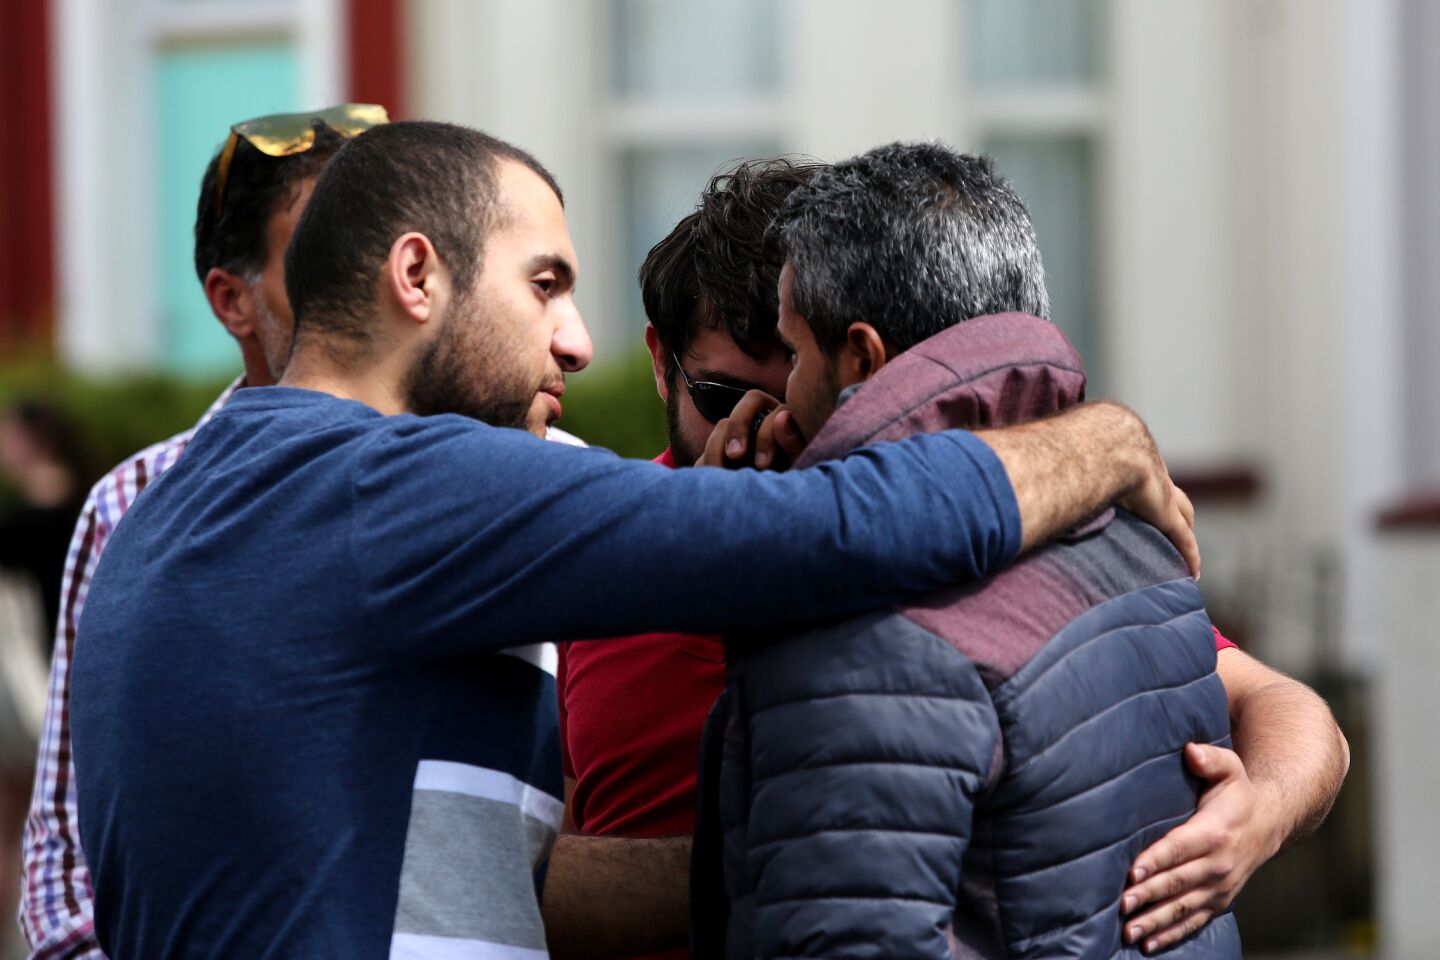 Men gather after laying flowers for the victims outside one of the Christchurch mosques.